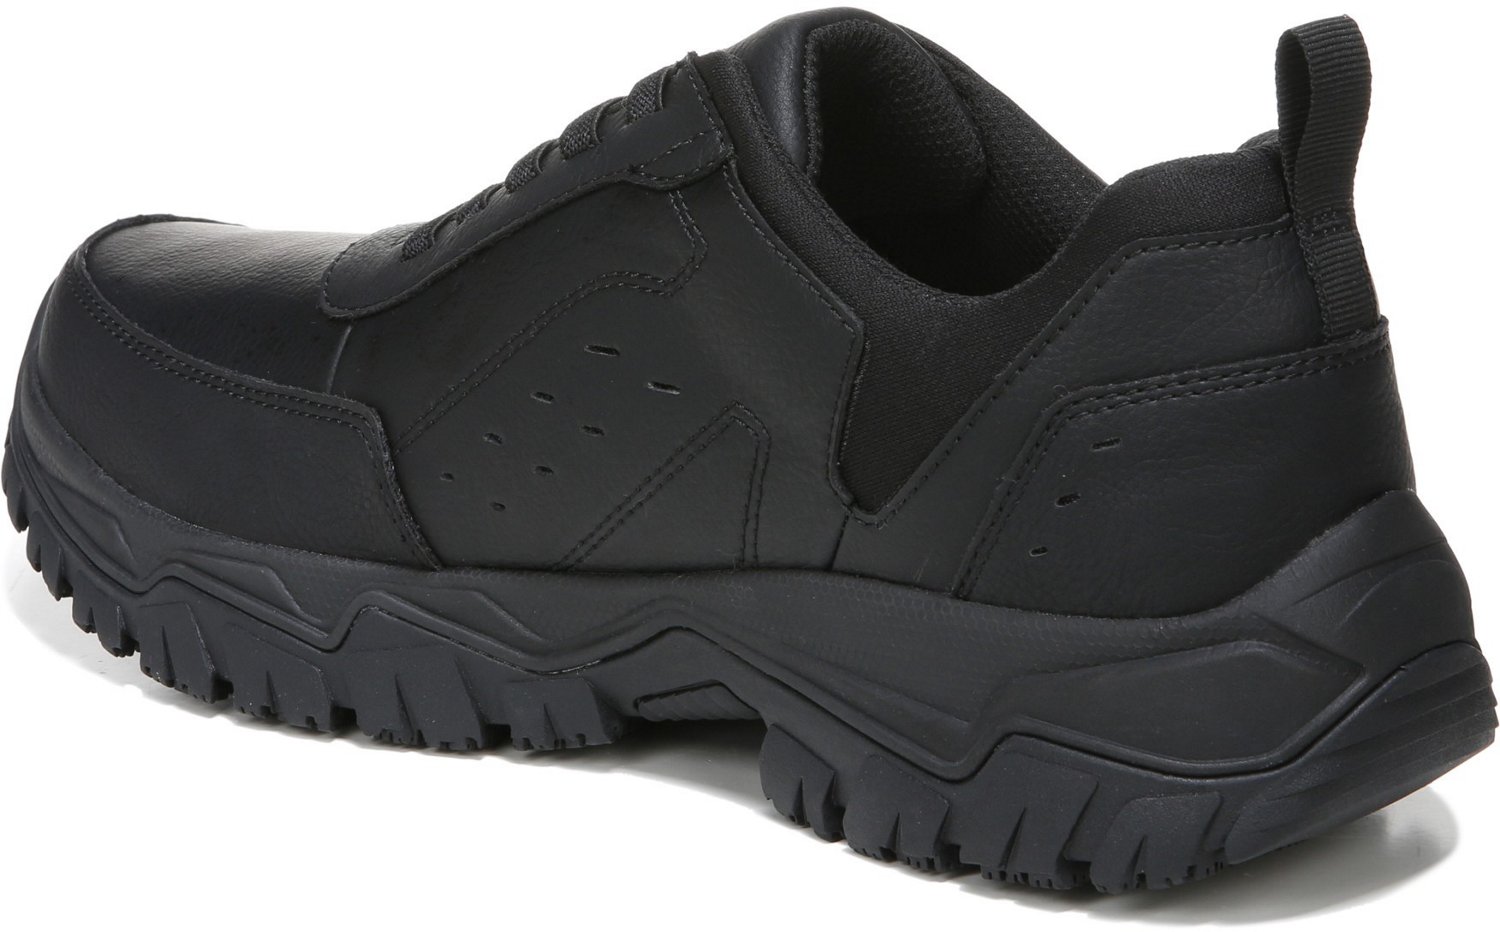 Dr. Scholl's Men's Bravery Slip-On Work Shoes | Academy